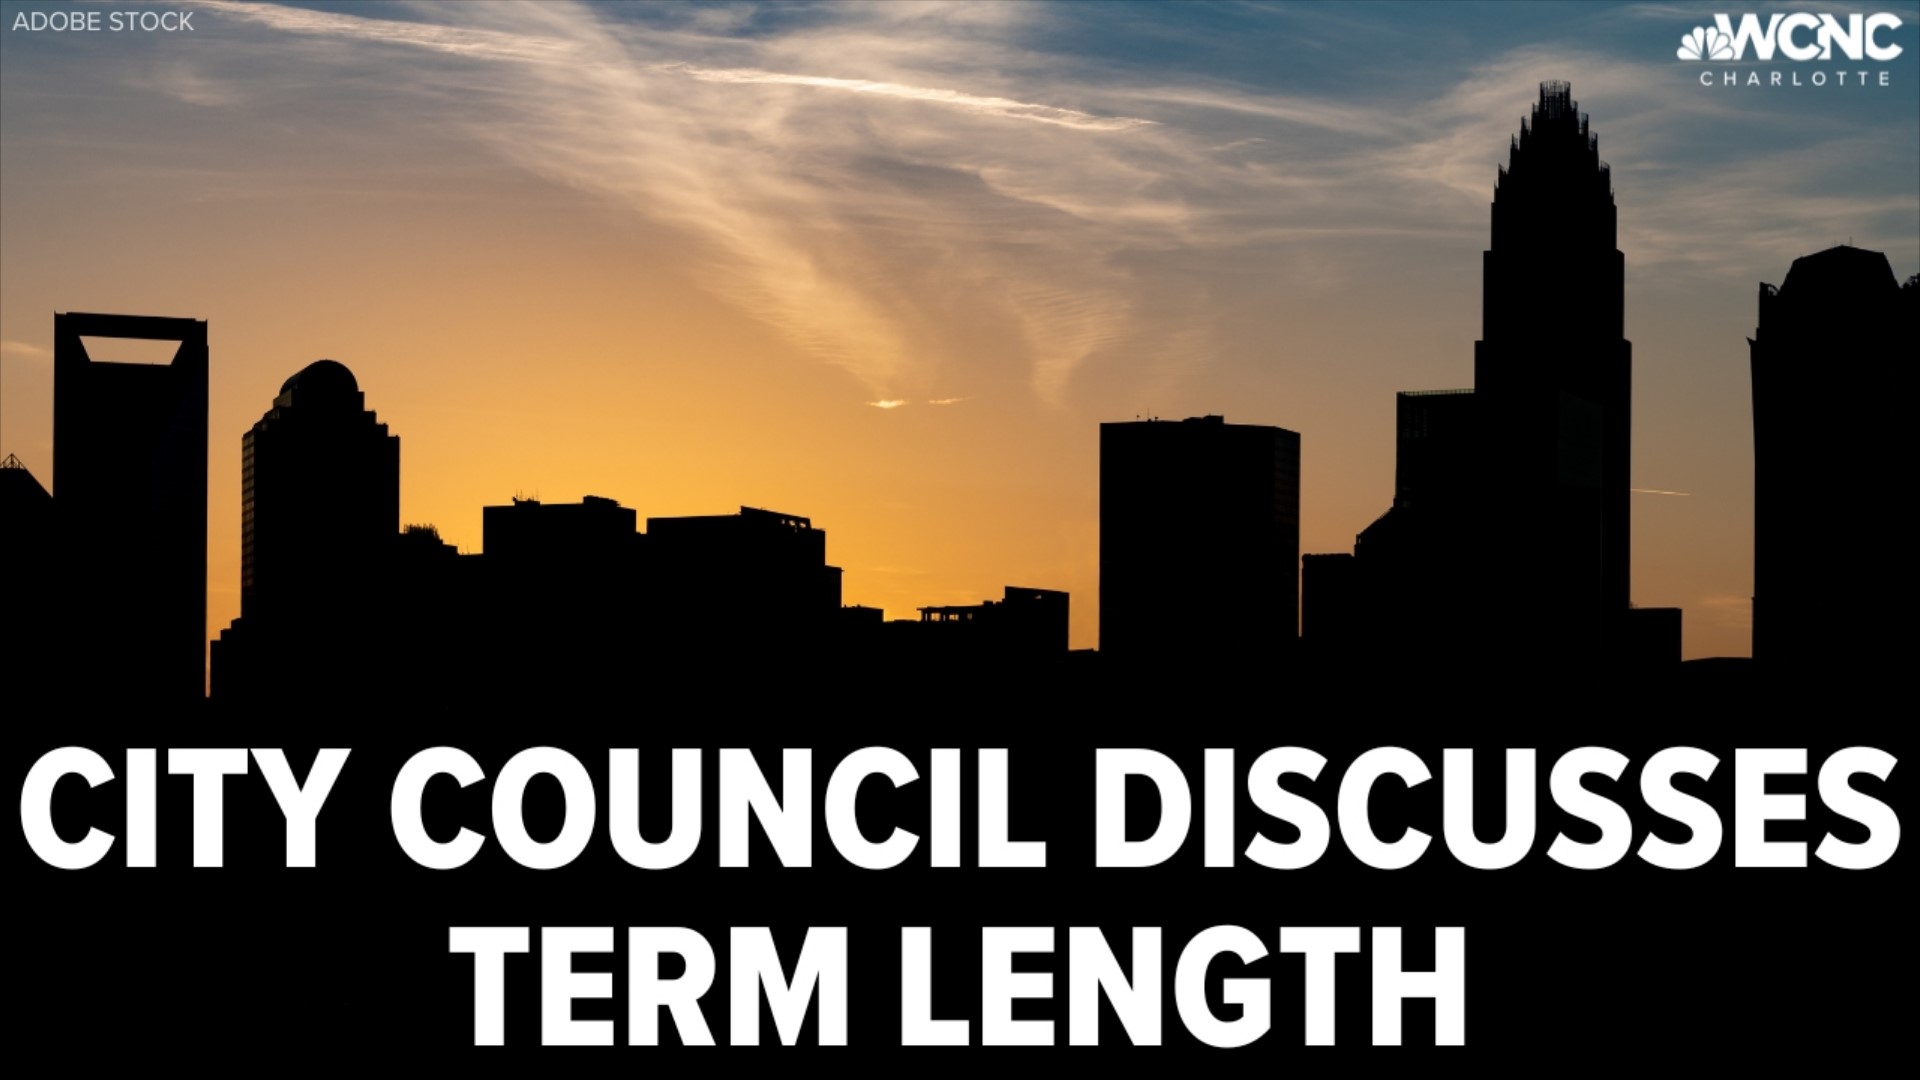 City officials are discussing expanding city council term lengths from two years to four years for elected office.